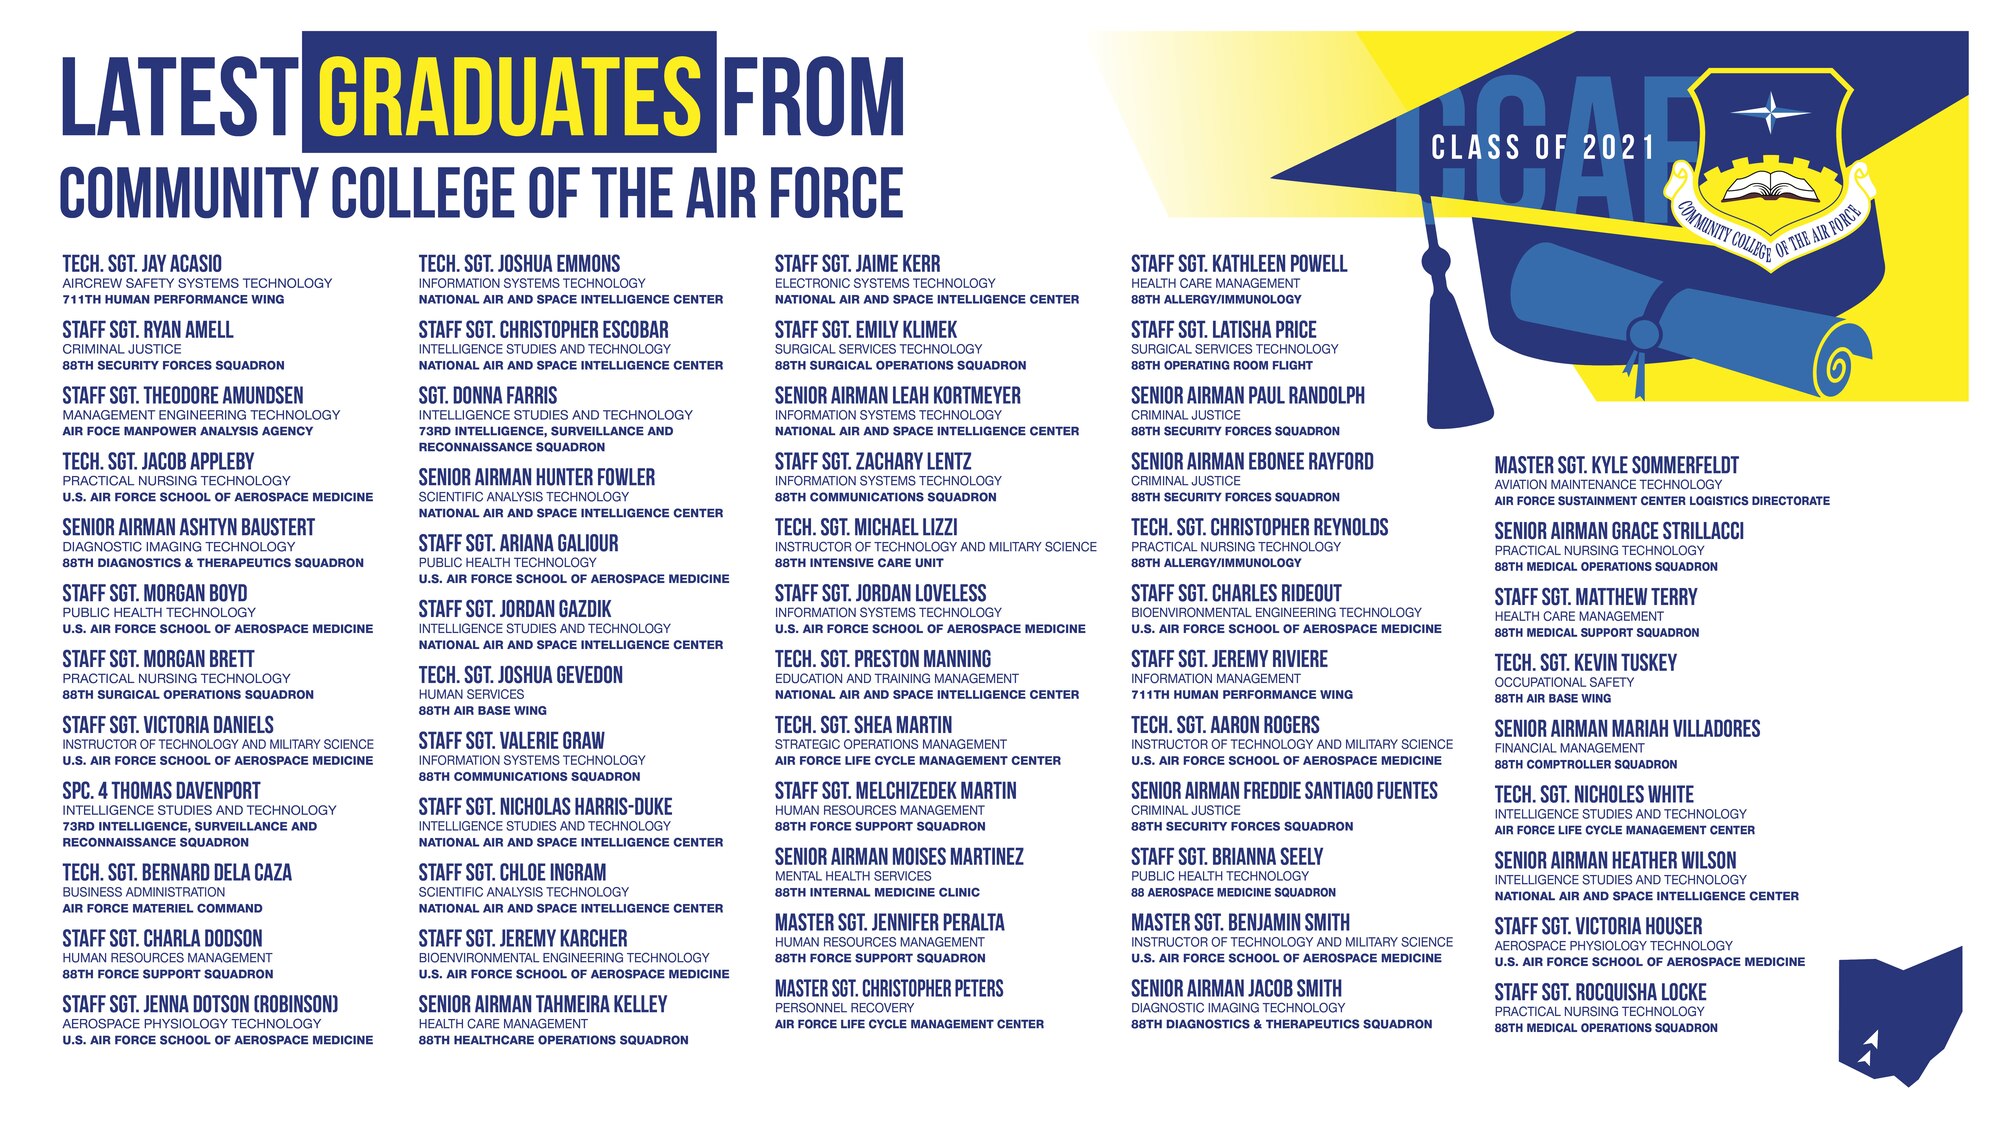 The Wright-Patterson Air Force Base Community College of the Air Force Class of 2021. (U.S. Air Force graphic by David Clingerman.